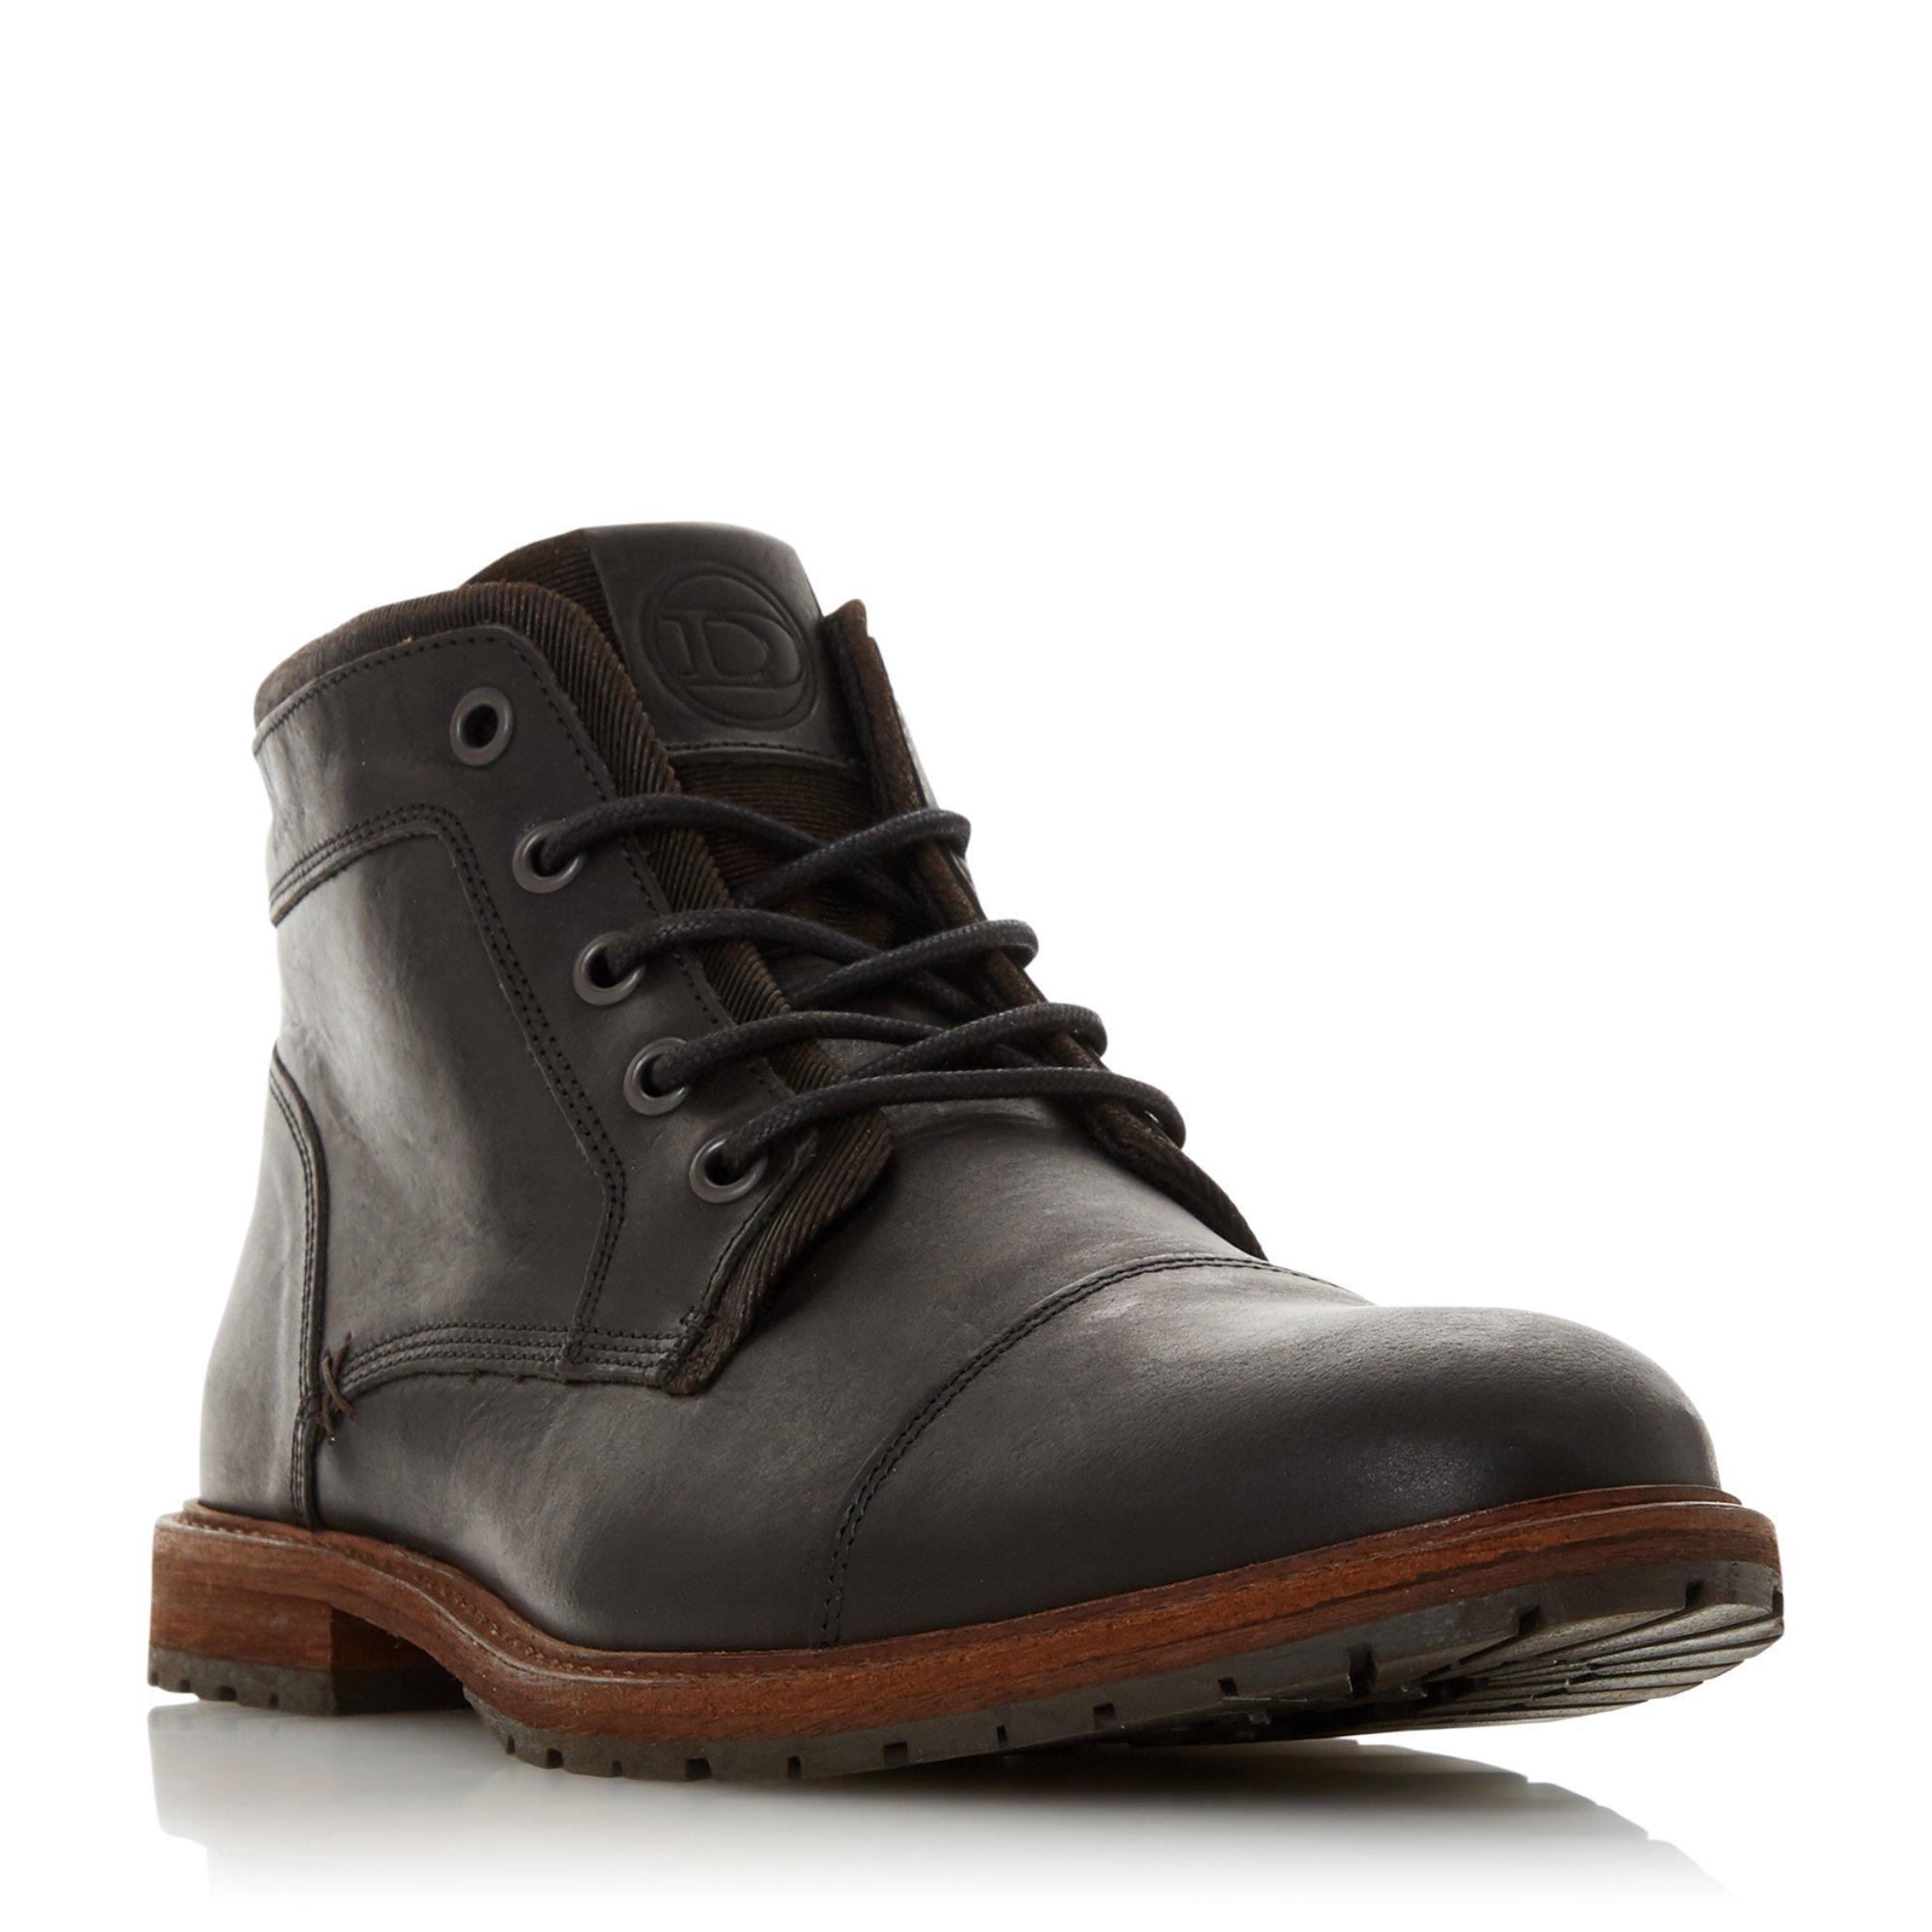 Dune Crawshaw Leather Chukka Boots in Black for Men - Lyst